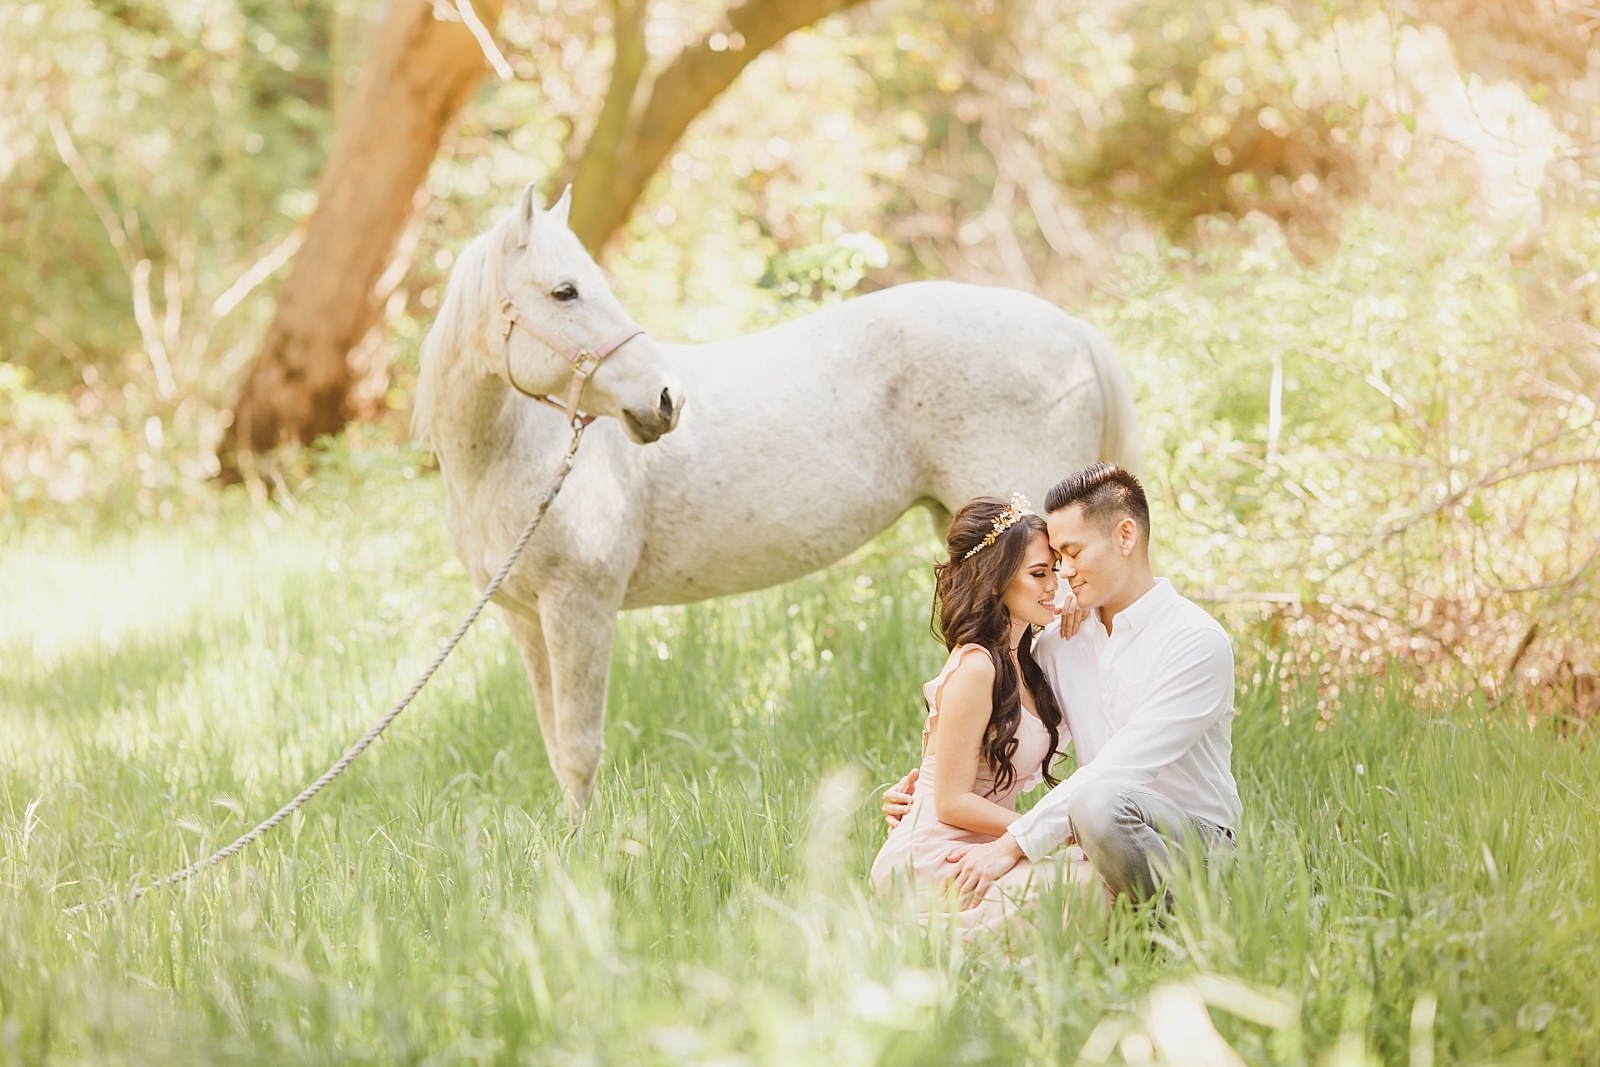 Fairytale engagement photo in a meadow with a white horse